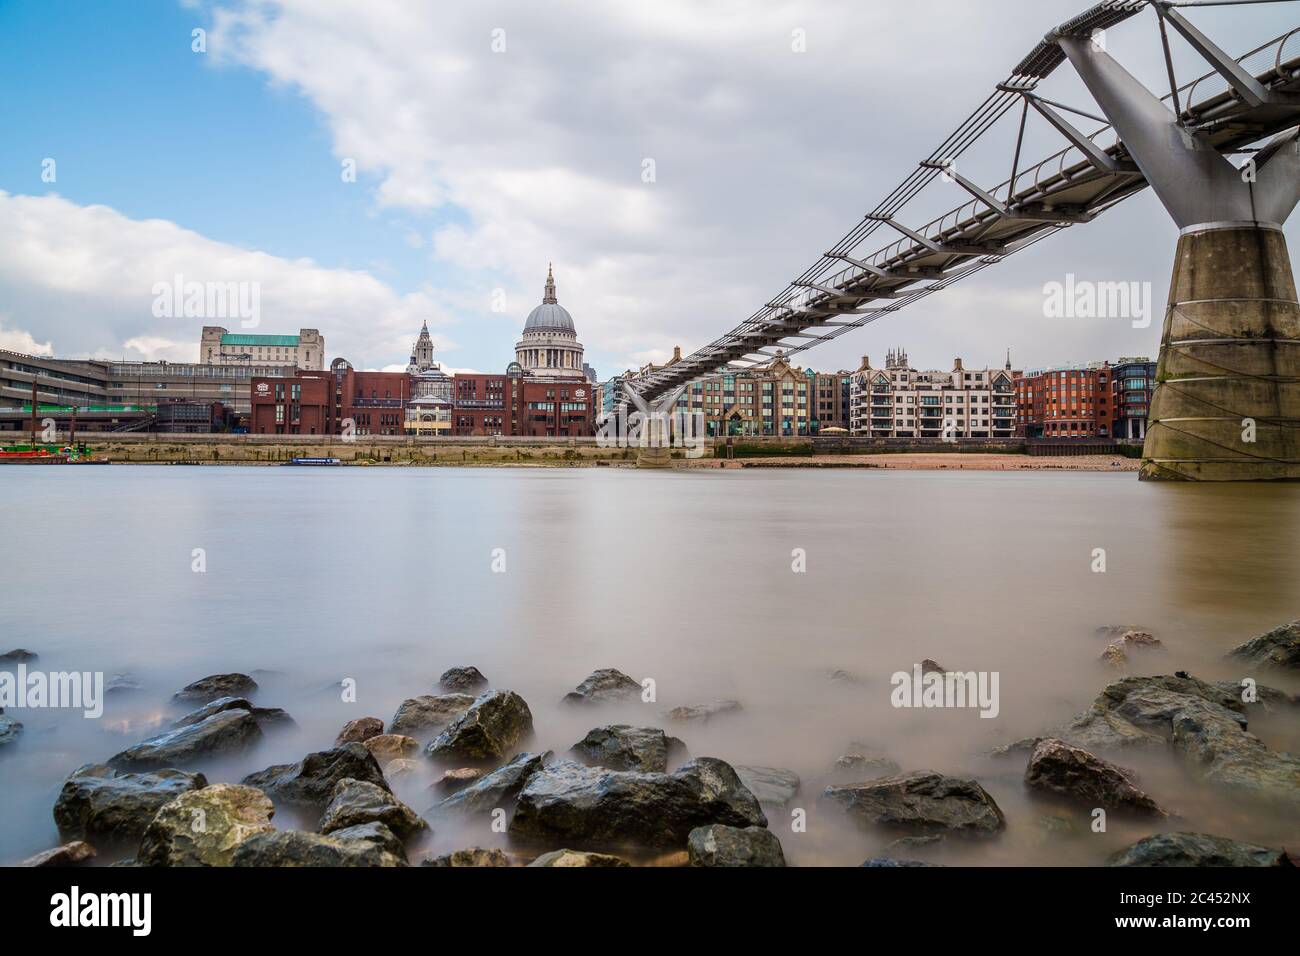 LONDON, UK - 24TH MARCH 2015: St Paul's Cathedral and Millenium Bridge in London during the day. Taken with a long exposure Stock Photo